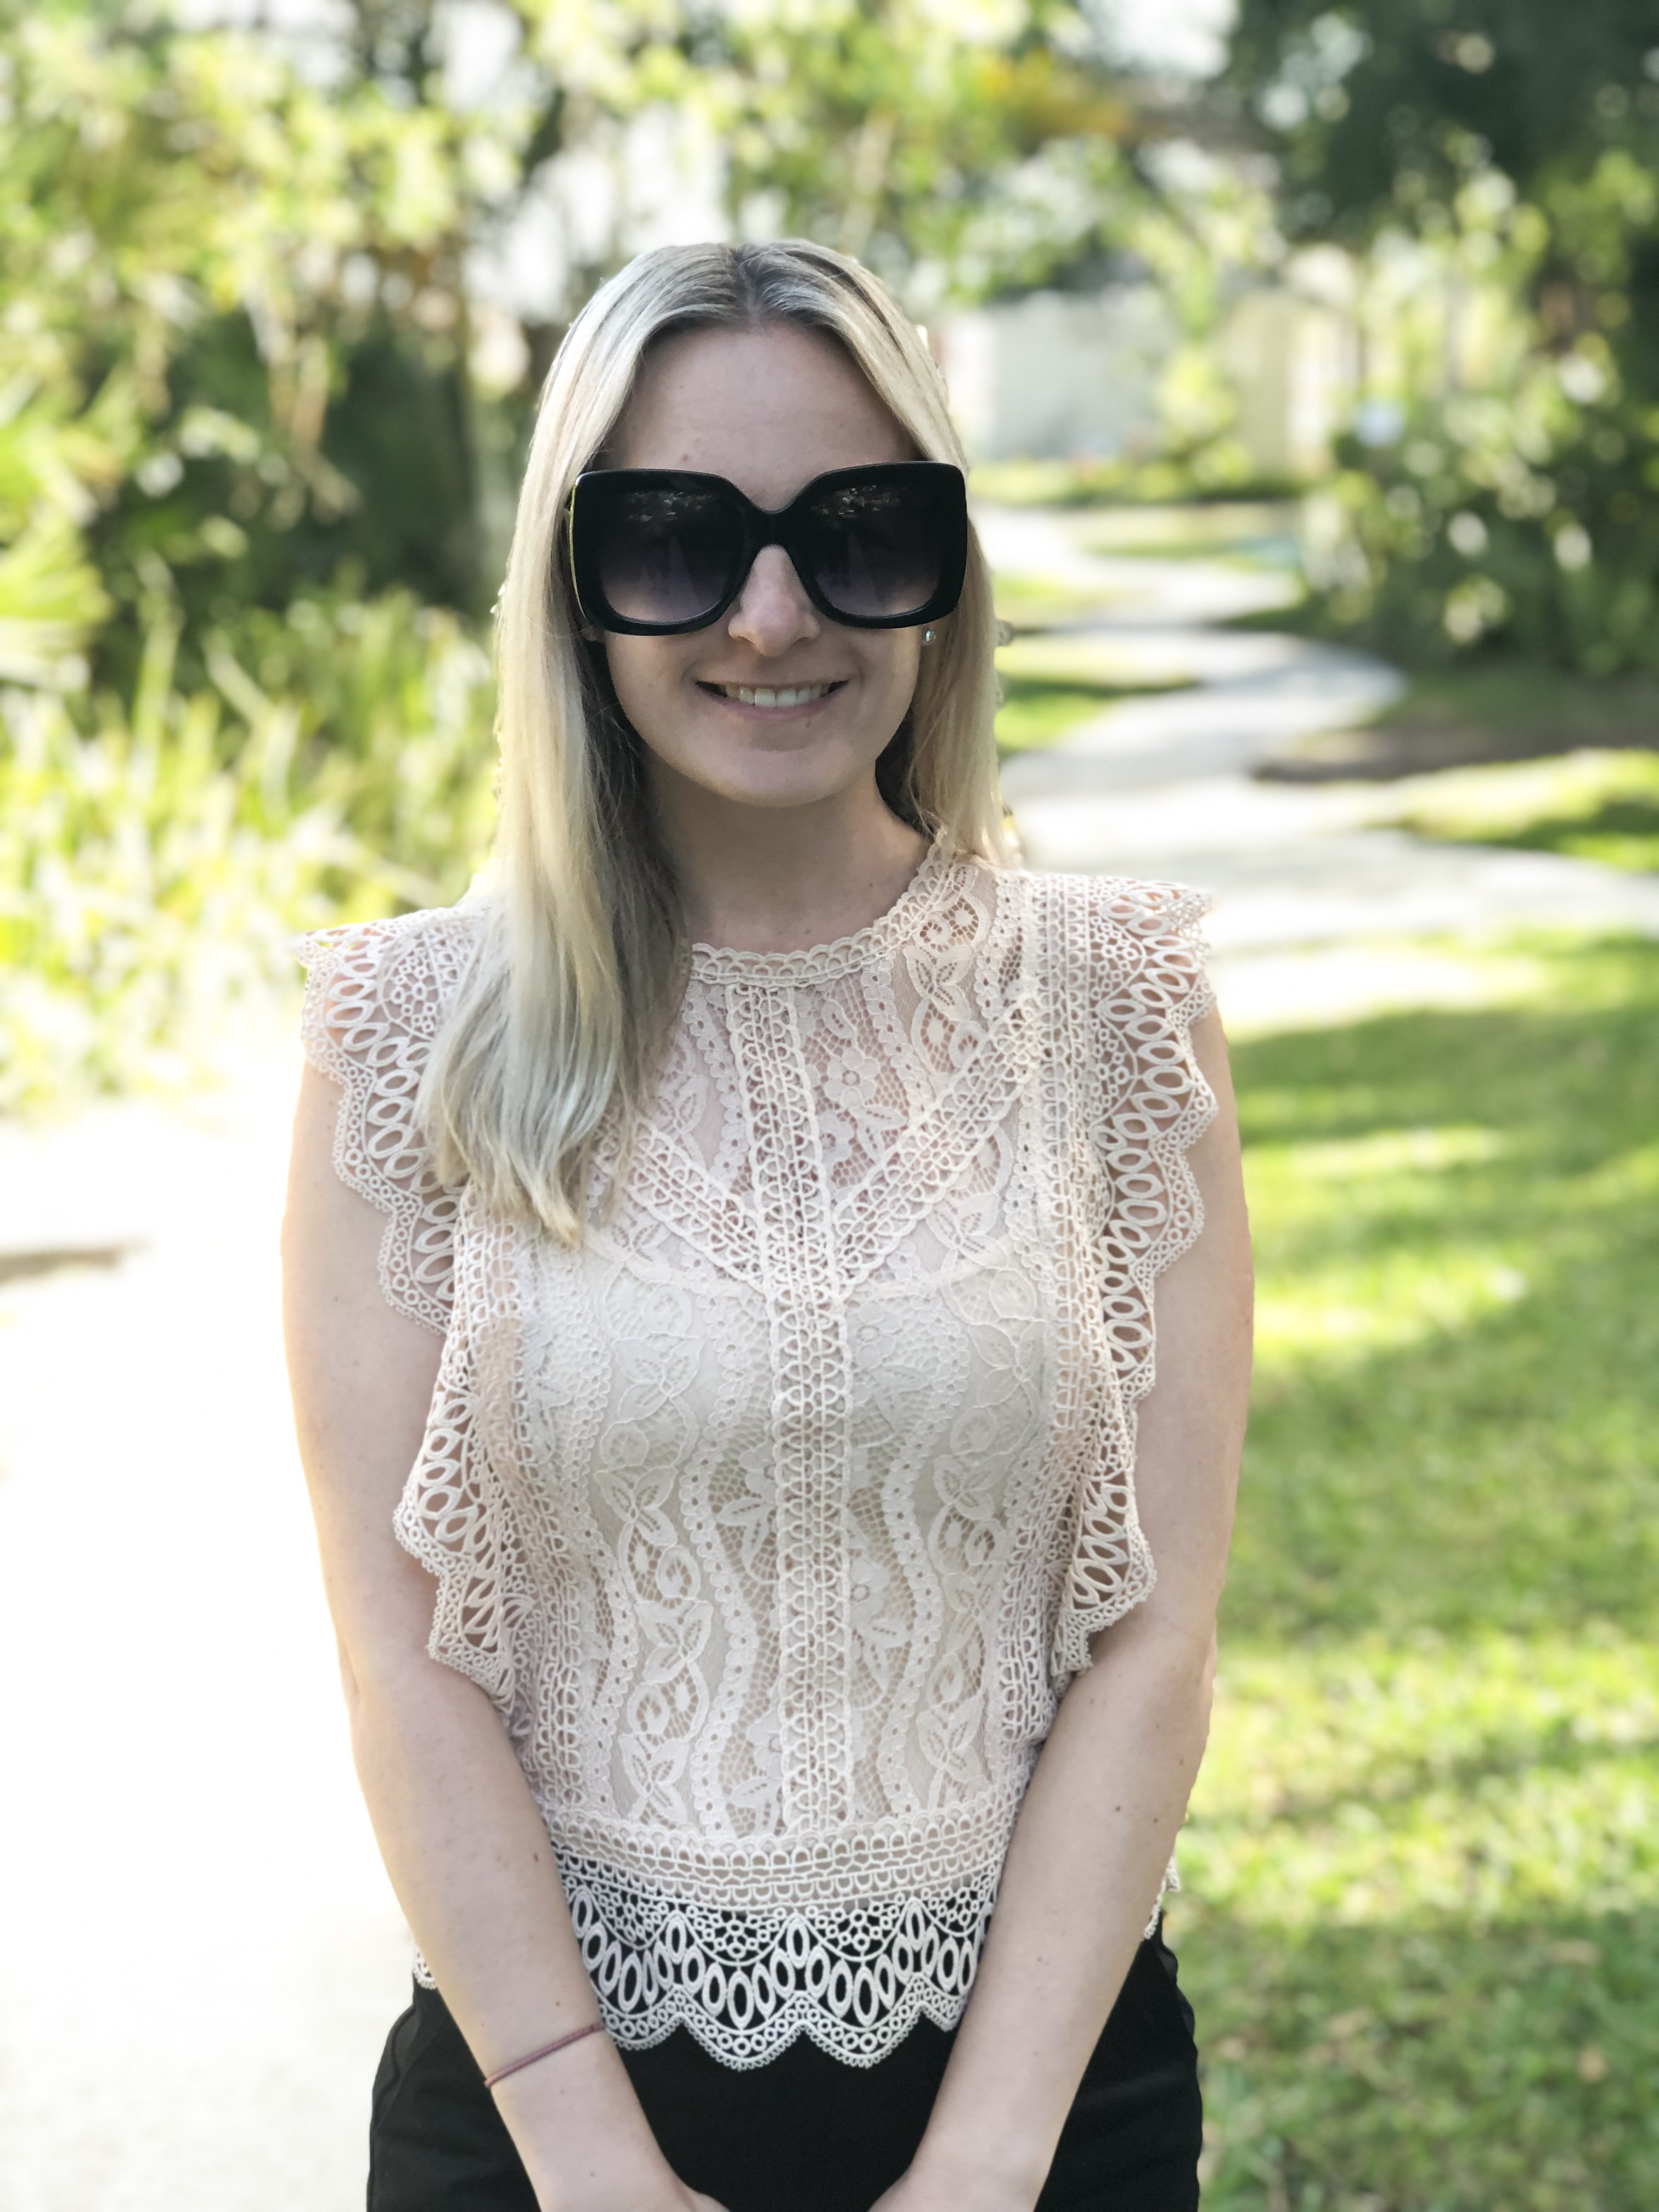 Lace Top from Zara on Livin' Life with Style